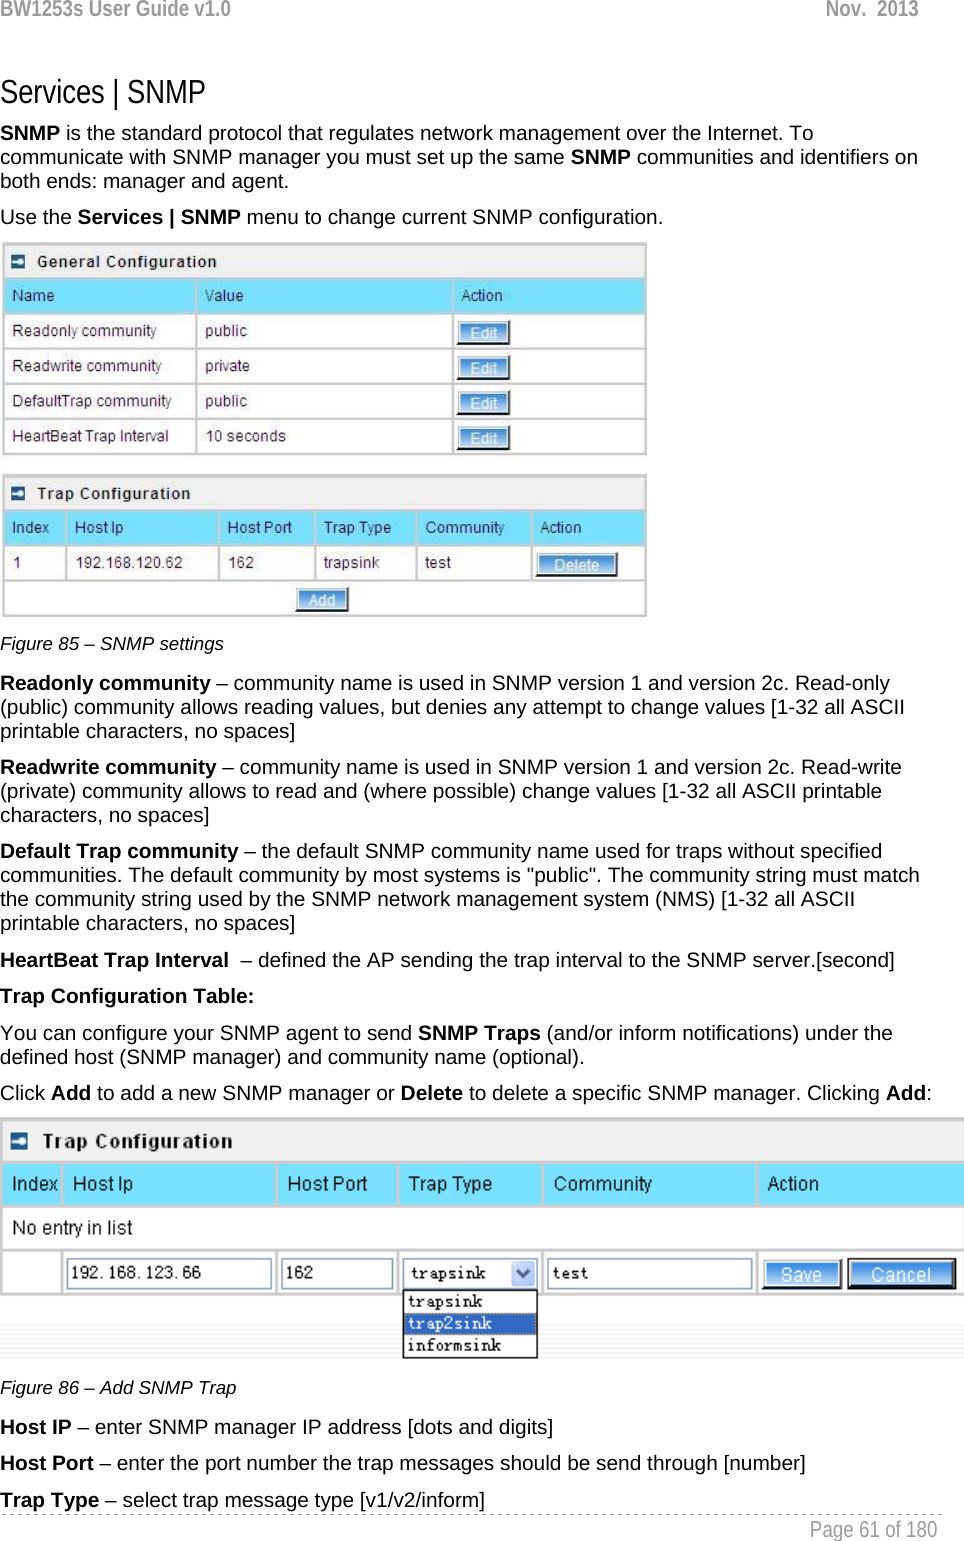 BW1253s User Guide v1.0  Nov.  2013     Page 61 of 180   Services | SNMP SNMP is the standard protocol that regulates network management over the Internet. To communicate with SNMP manager you must set up the same SNMP communities and identifiers on both ends: manager and agent. Use the Services | SNMP menu to change current SNMP configuration.  Figure 85 – SNMP settings Readonly community – community name is used in SNMP version 1 and version 2c. Read-only (public) community allows reading values, but denies any attempt to change values [1-32 all ASCII printable characters, no spaces] Readwrite community – community name is used in SNMP version 1 and version 2c. Read-write (private) community allows to read and (where possible) change values [1-32 all ASCII printable characters, no spaces] Default Trap community – the default SNMP community name used for traps without specified communities. The default community by most systems is &quot;public&quot;. The community string must match the community string used by the SNMP network management system (NMS) [1-32 all ASCII printable characters, no spaces] HeartBeat Trap Interval  – defined the AP sending the trap interval to the SNMP server.[second] Trap Configuration Table: You can configure your SNMP agent to send SNMP Traps (and/or inform notifications) under the defined host (SNMP manager) and community name (optional). Click Add to add a new SNMP manager or Delete to delete a specific SNMP manager. Clicking Add:  Figure 86 – Add SNMP Trap Host IP – enter SNMP manager IP address [dots and digits] Host Port – enter the port number the trap messages should be send through [number] Trap Type – select trap message type [v1/v2/inform] 